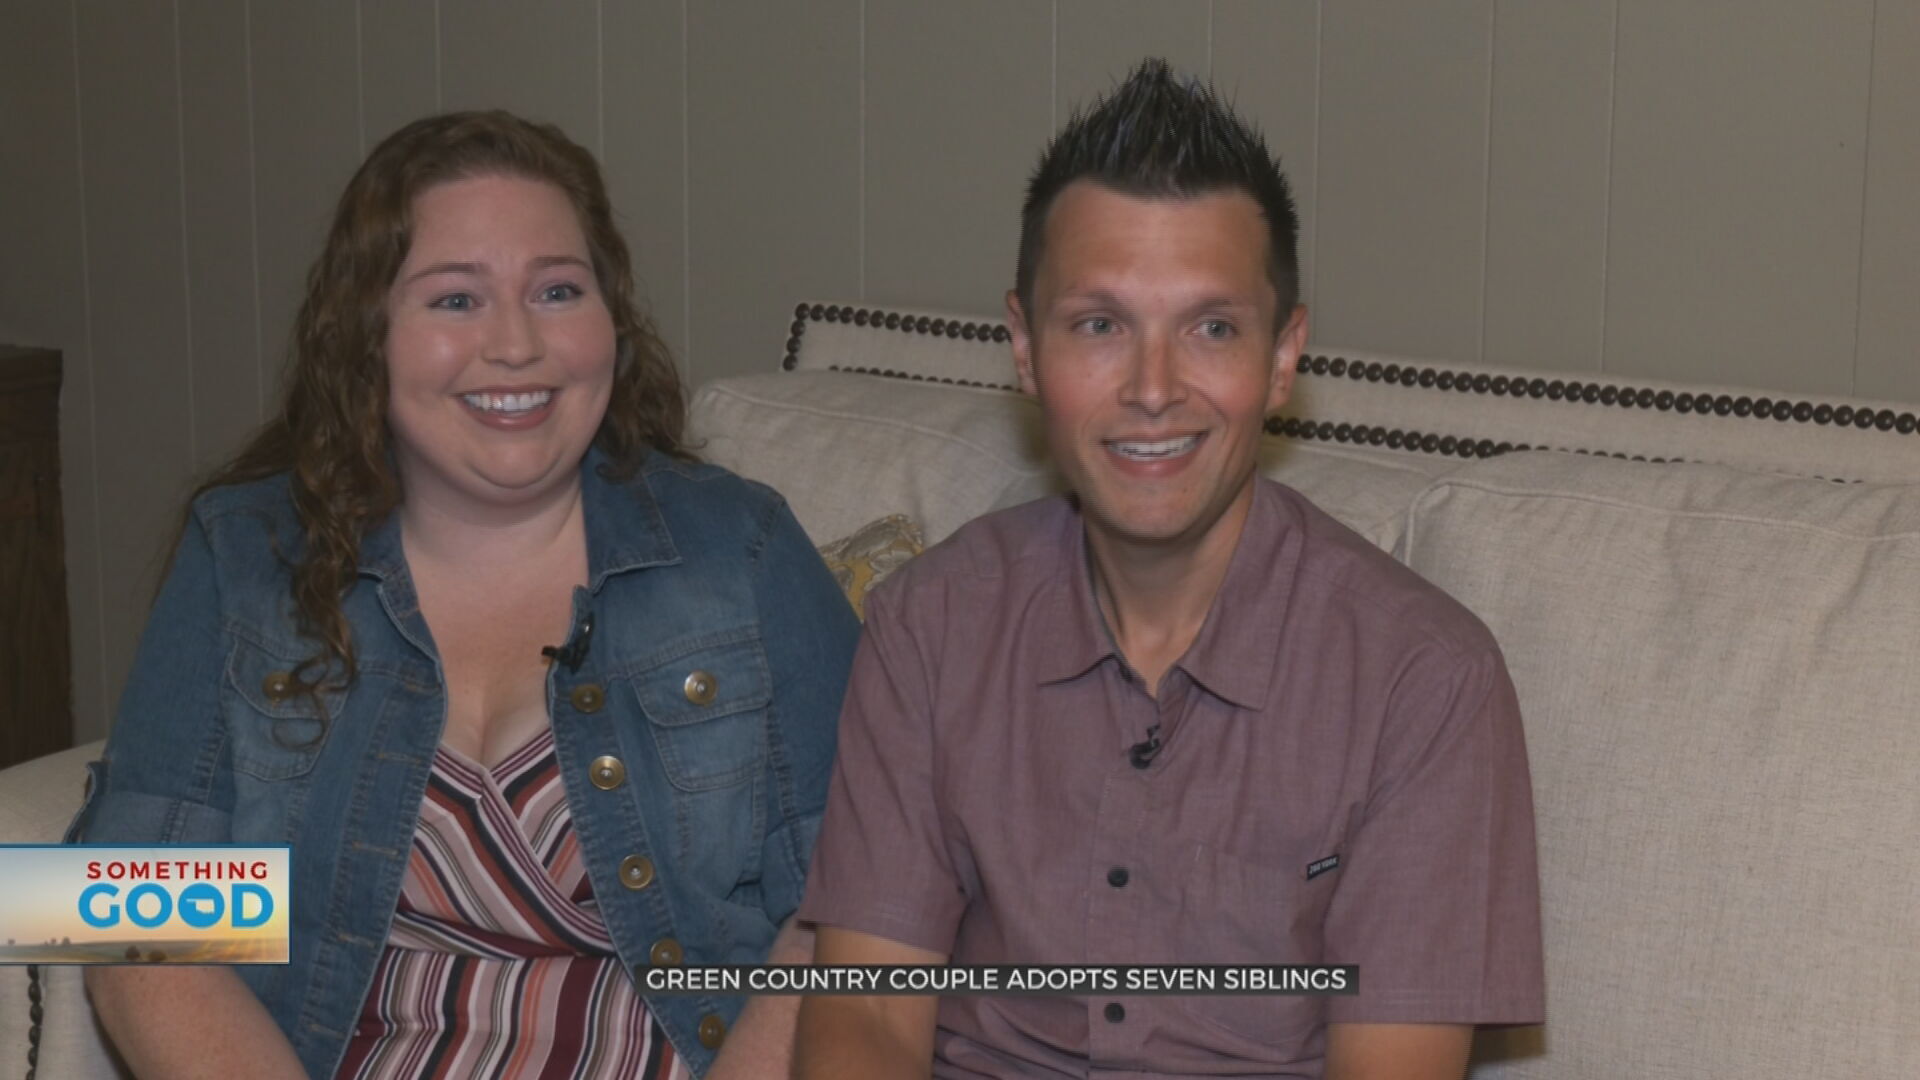 7 Siblings Adopted By Local Couple Who Says ‘It Was Meant To Be’